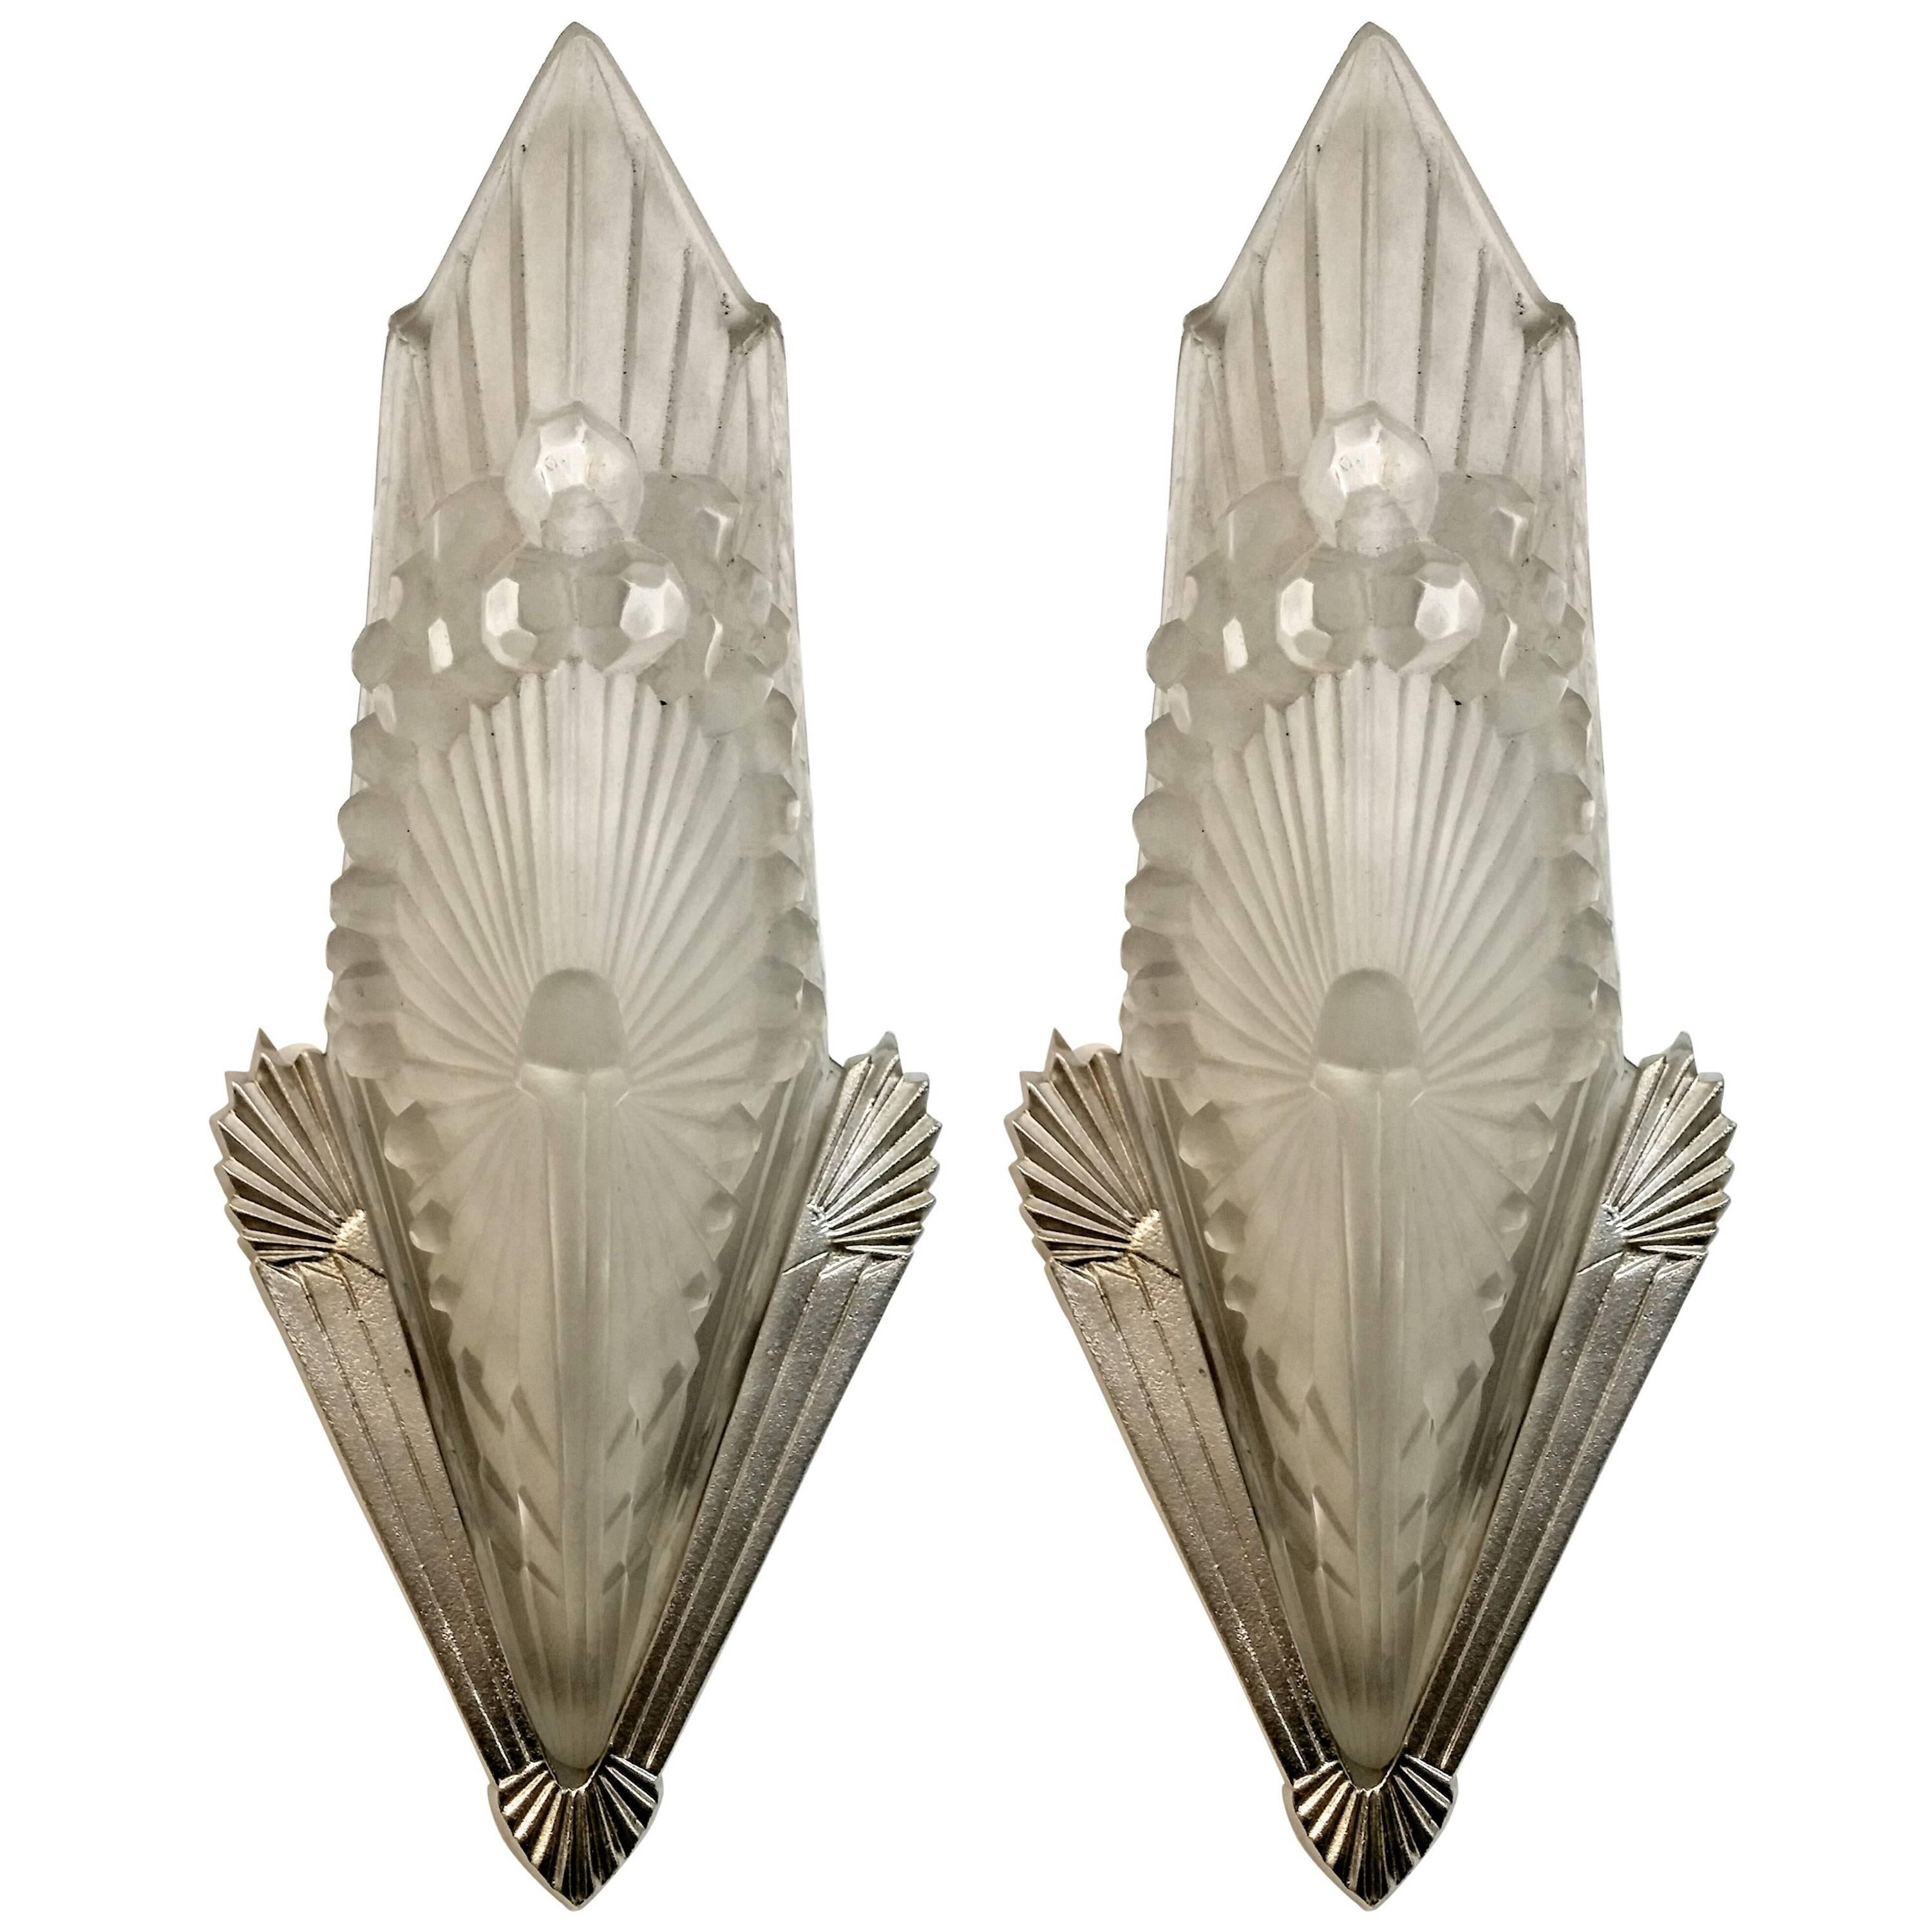 Pair of French Art Deco signed by Schneider (2 pairs available)